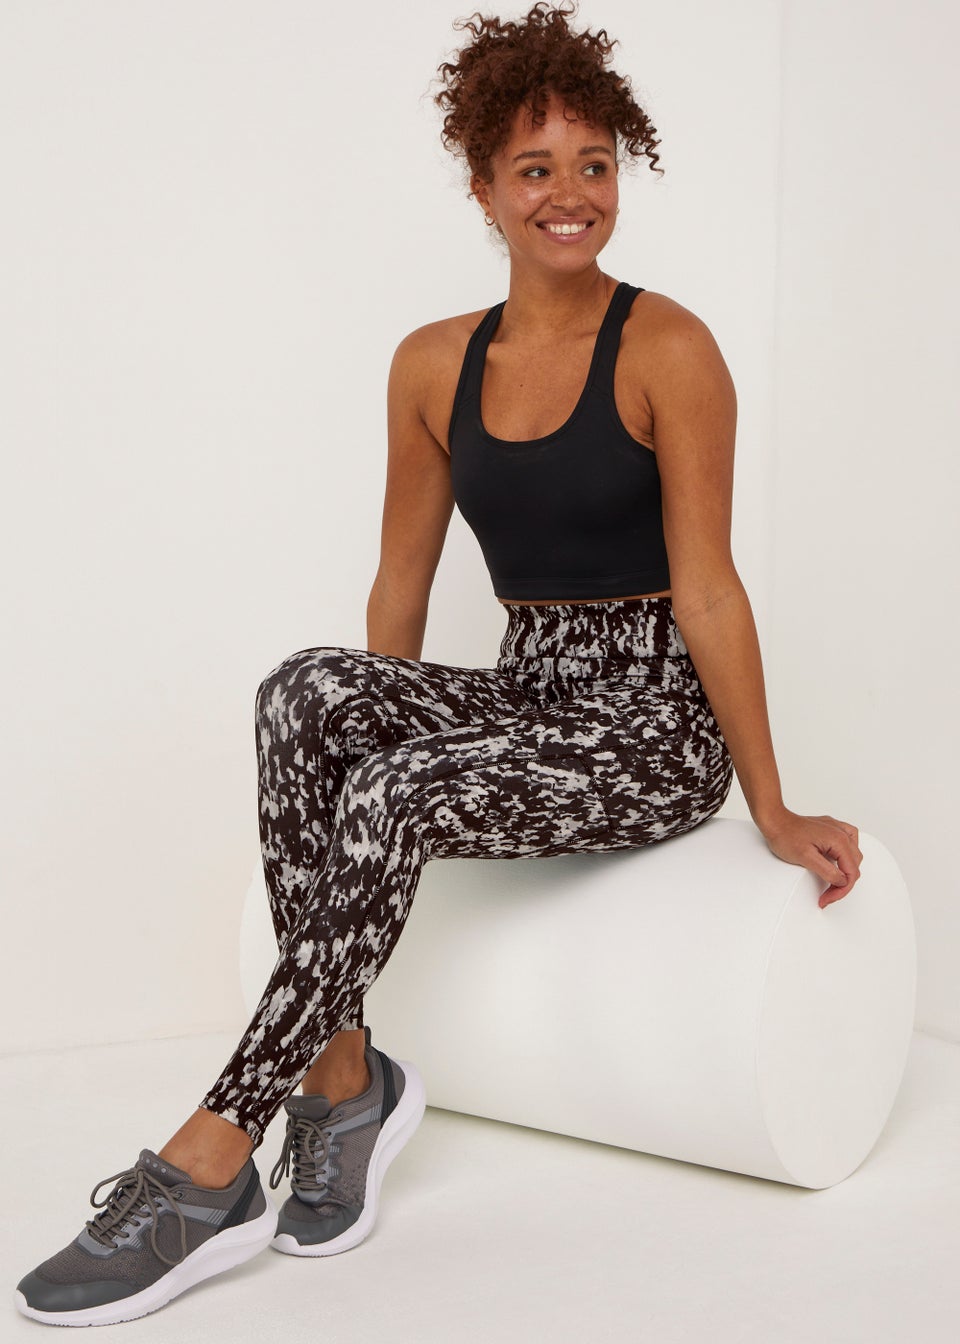 Get in shape with Matalan's stylish Souluxe gym wear range which includes  leggings, sports bras, gym bags and more - Berkshire Live